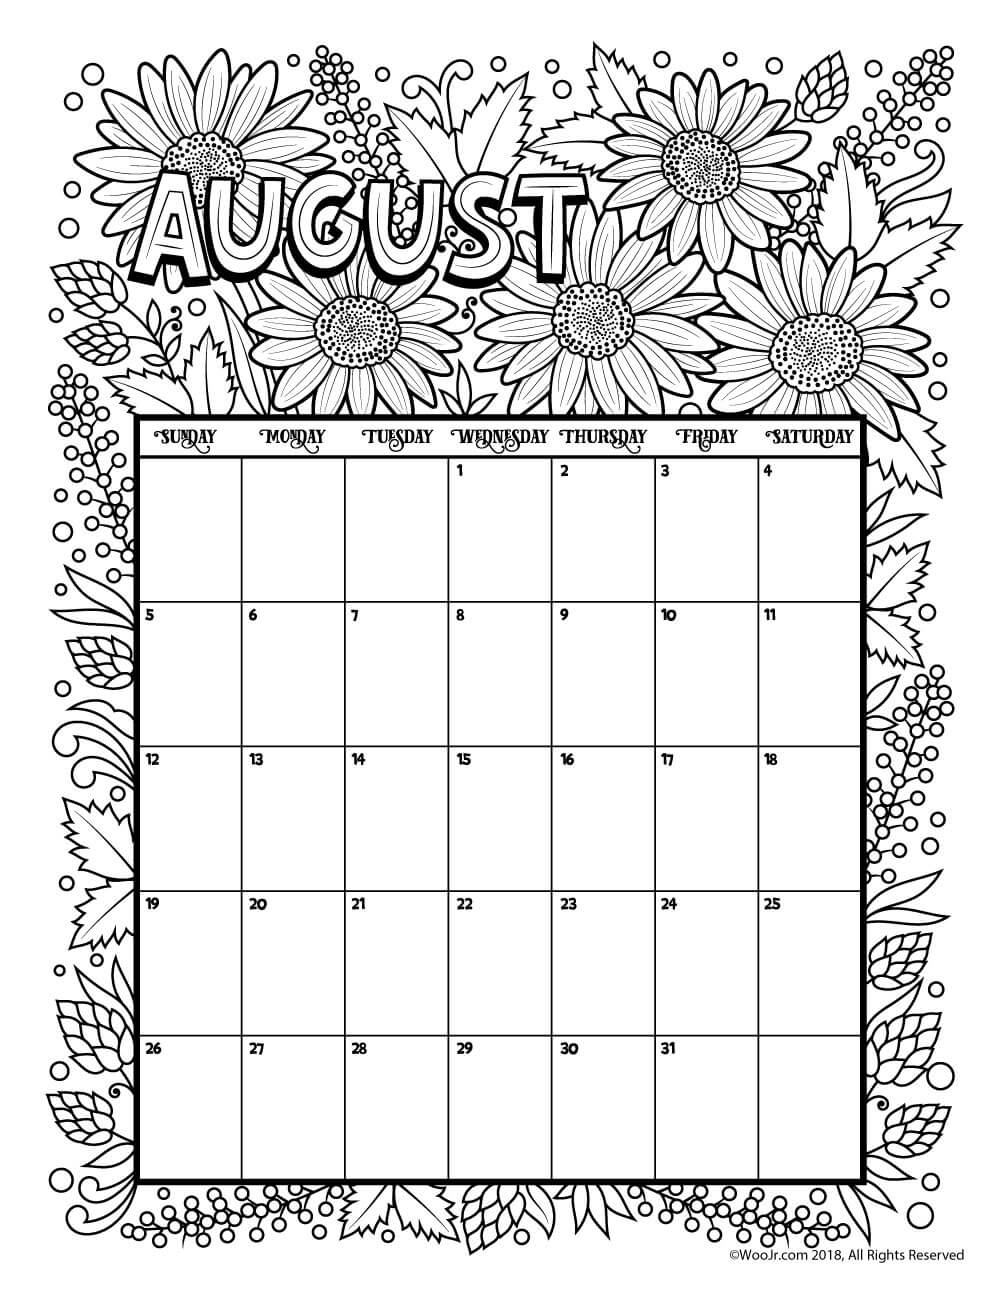 august-calendar-coloring-pages-coloring-cool